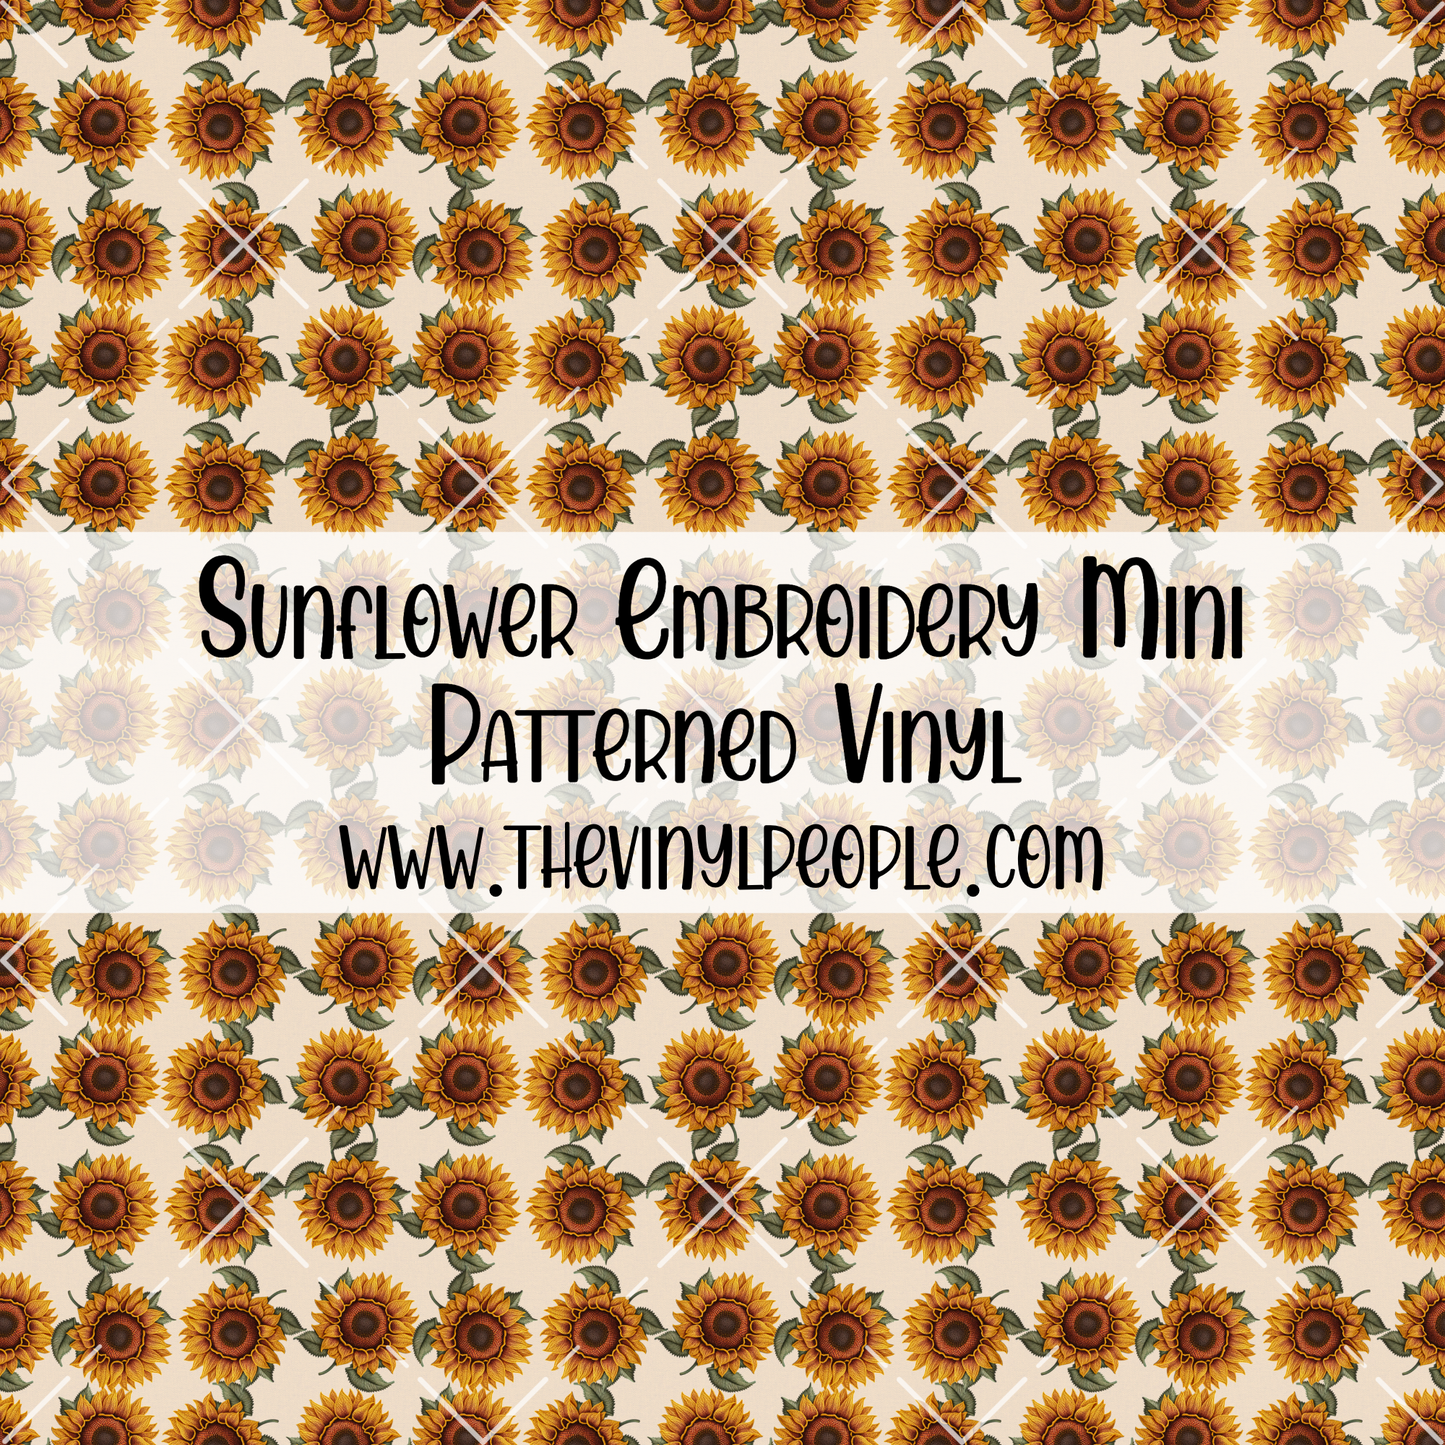 Sunflower Embroidery Patterned Vinyl